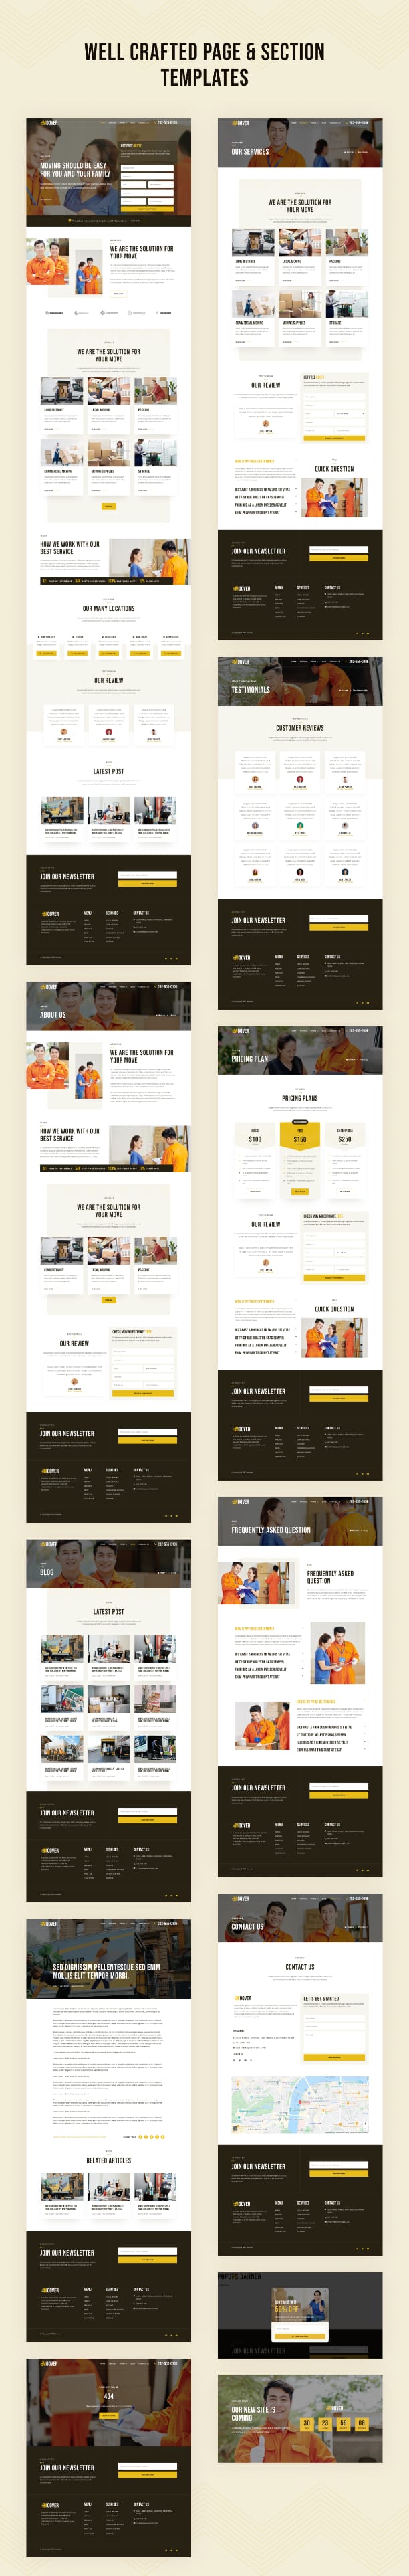 Office moving company website template